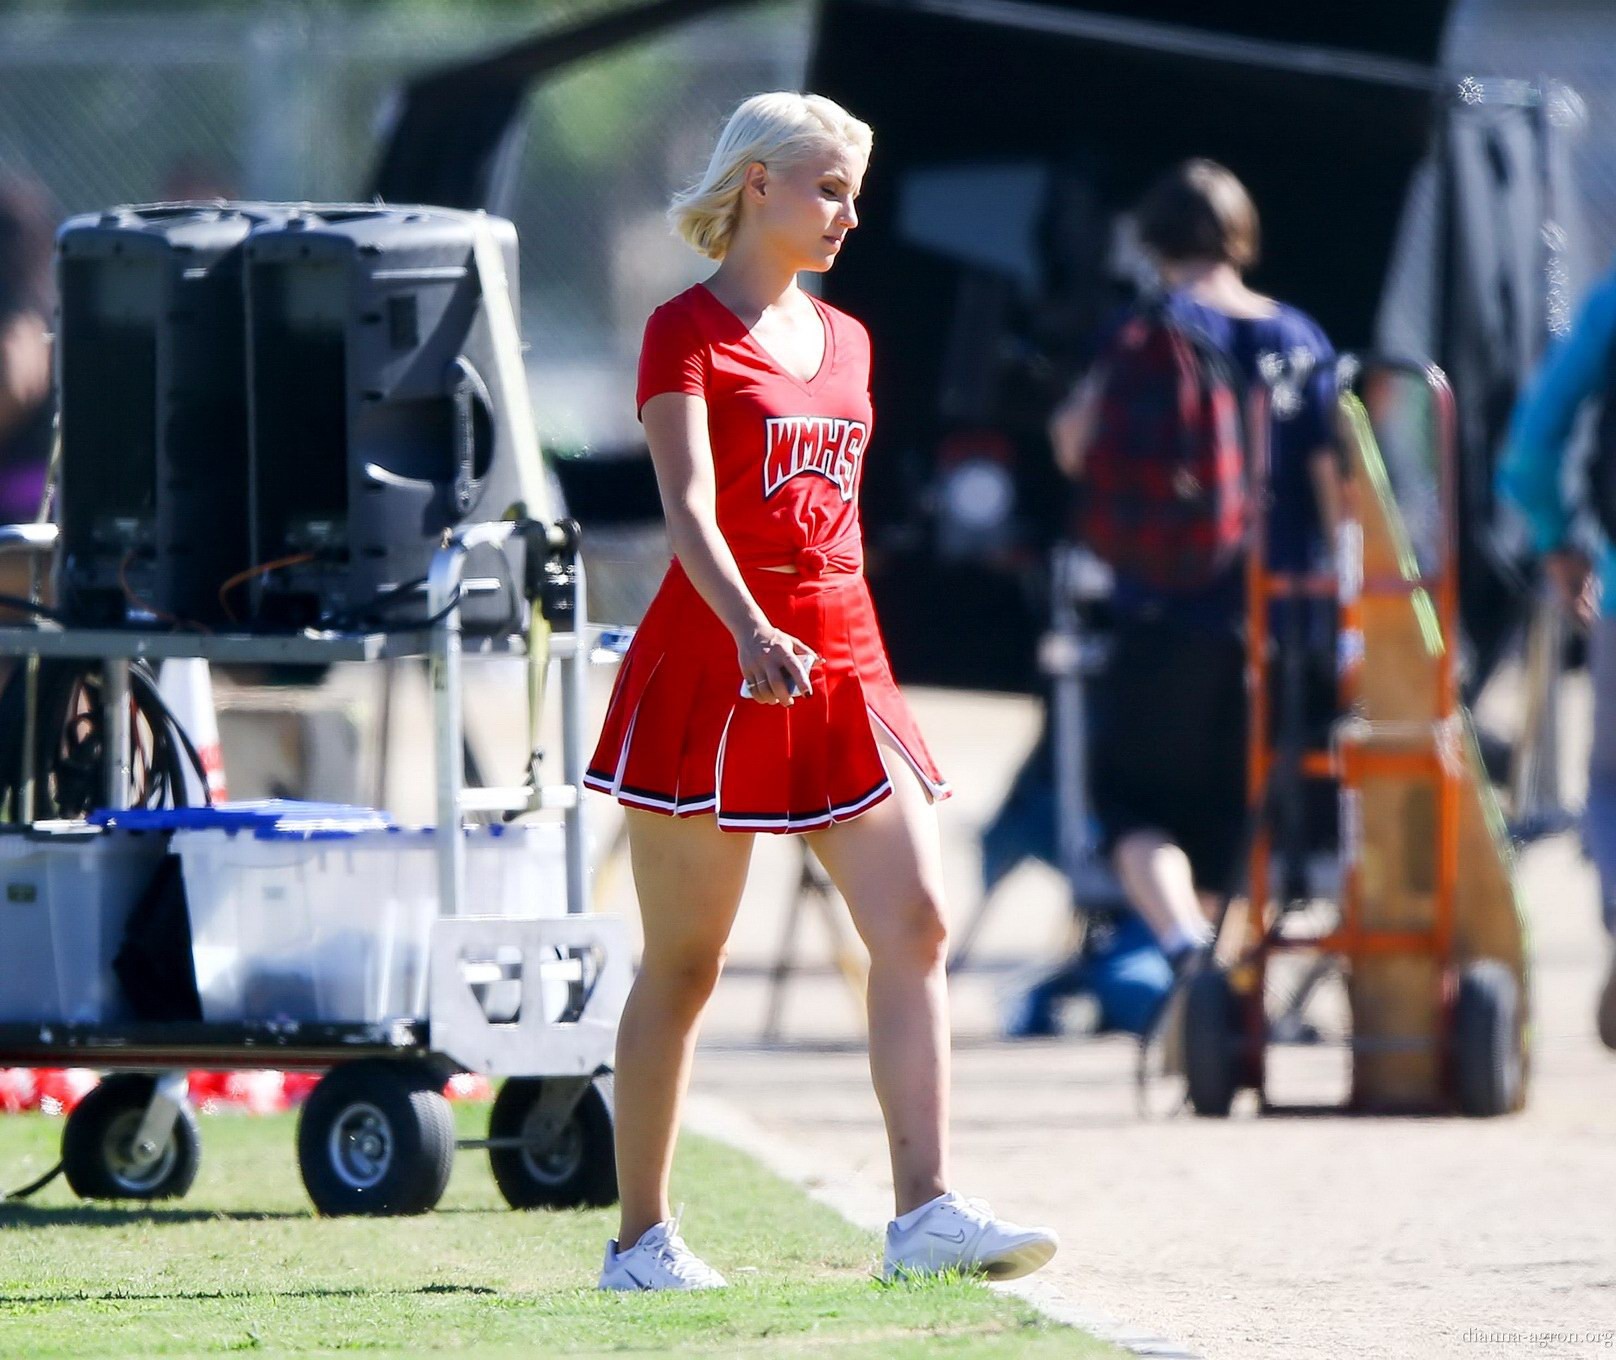 Dianna Agron in cheerleader outfit flashing her red panties on Glee season 6 set #75185147